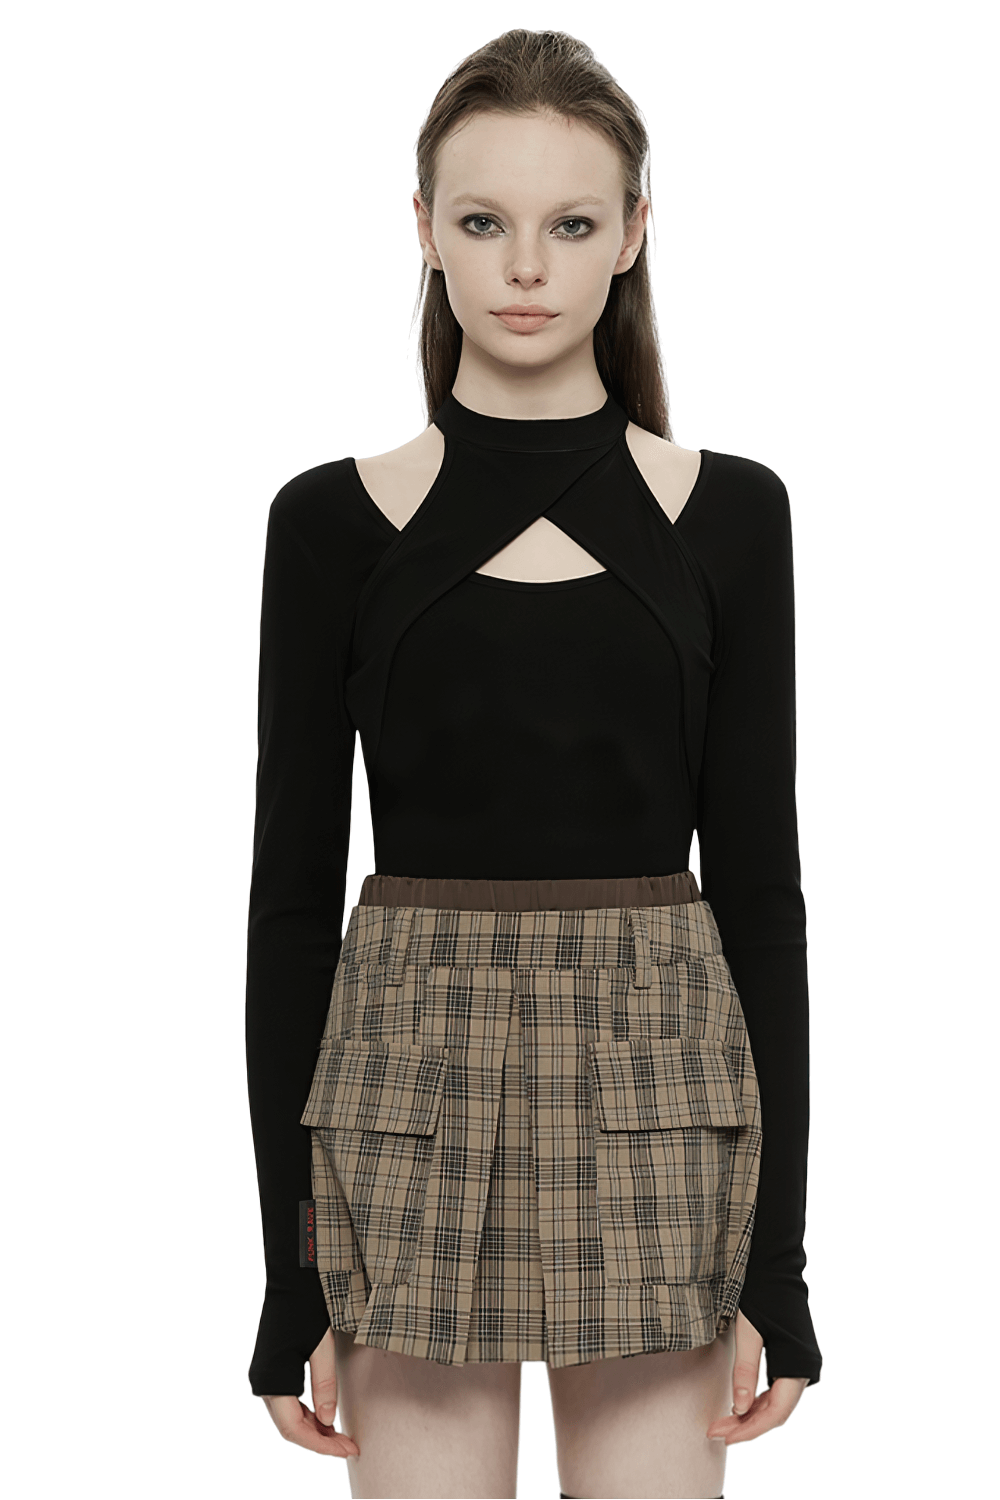 Stylish Gothic Black Long Sleeve Cut Out Crop Top